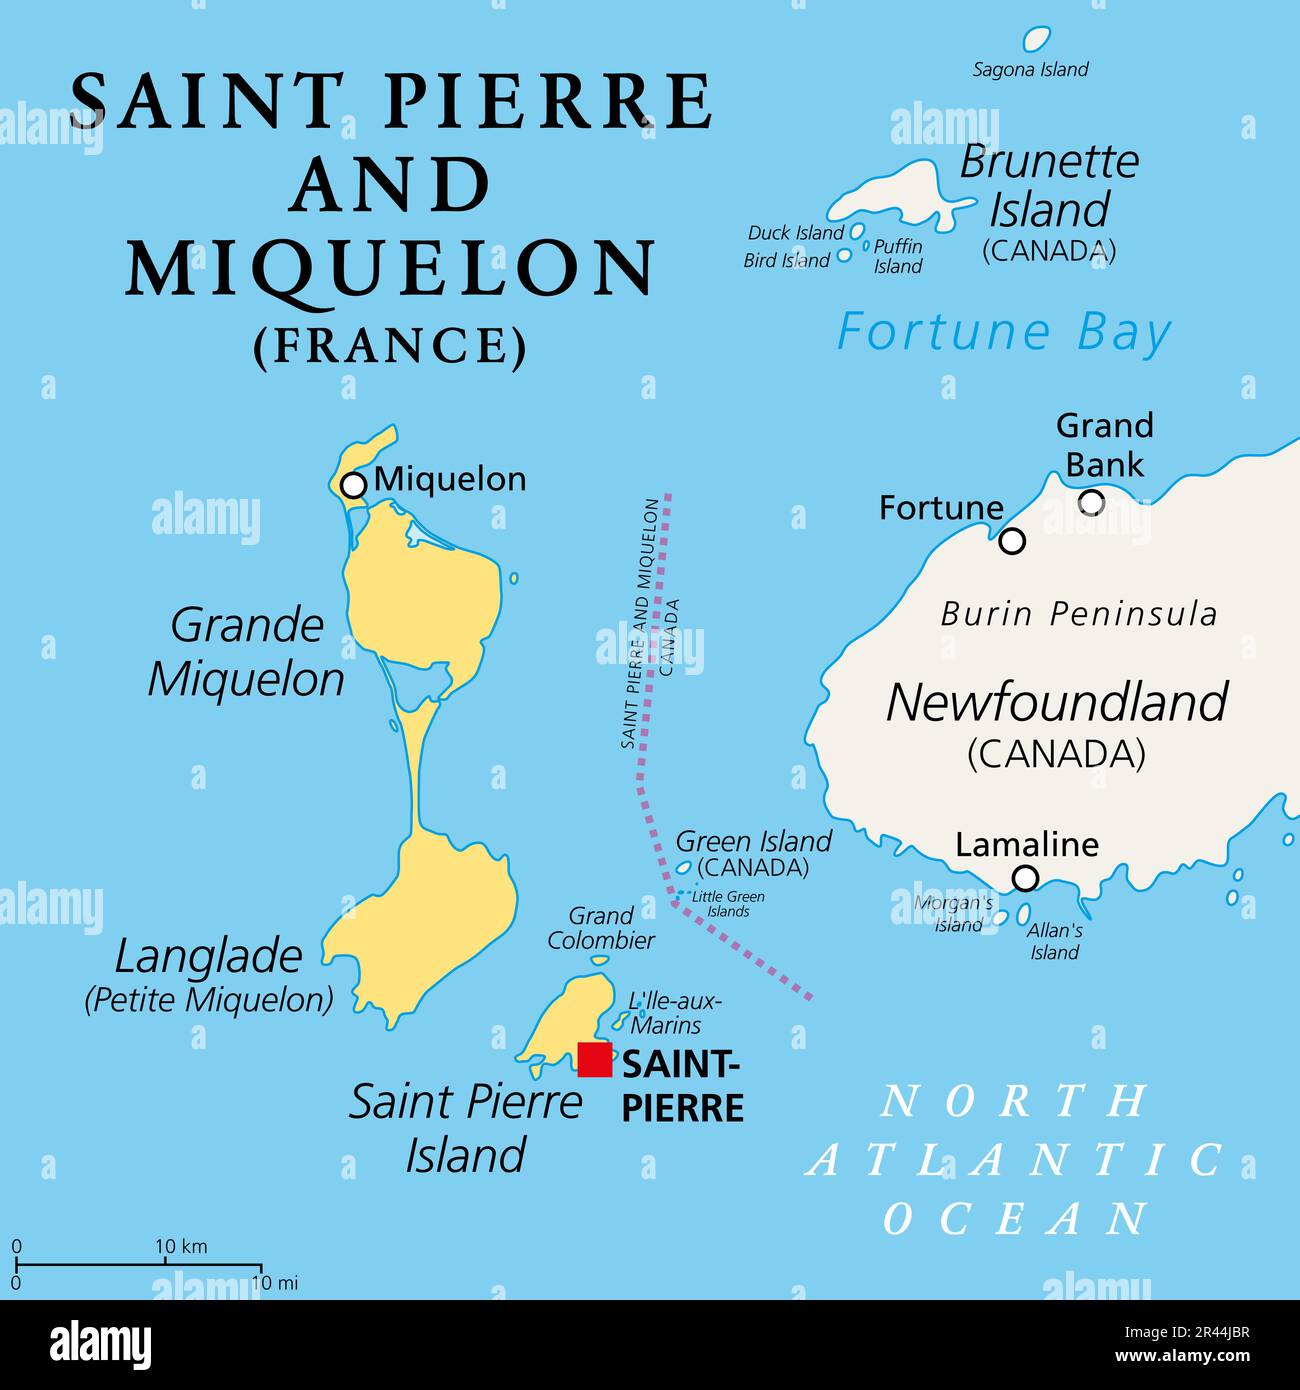 Saint Pierre and Miquelon, political map. Archipelago and self-governing territorial overseas collectivity of France in the North Atlantic Ocean. Stock Photo